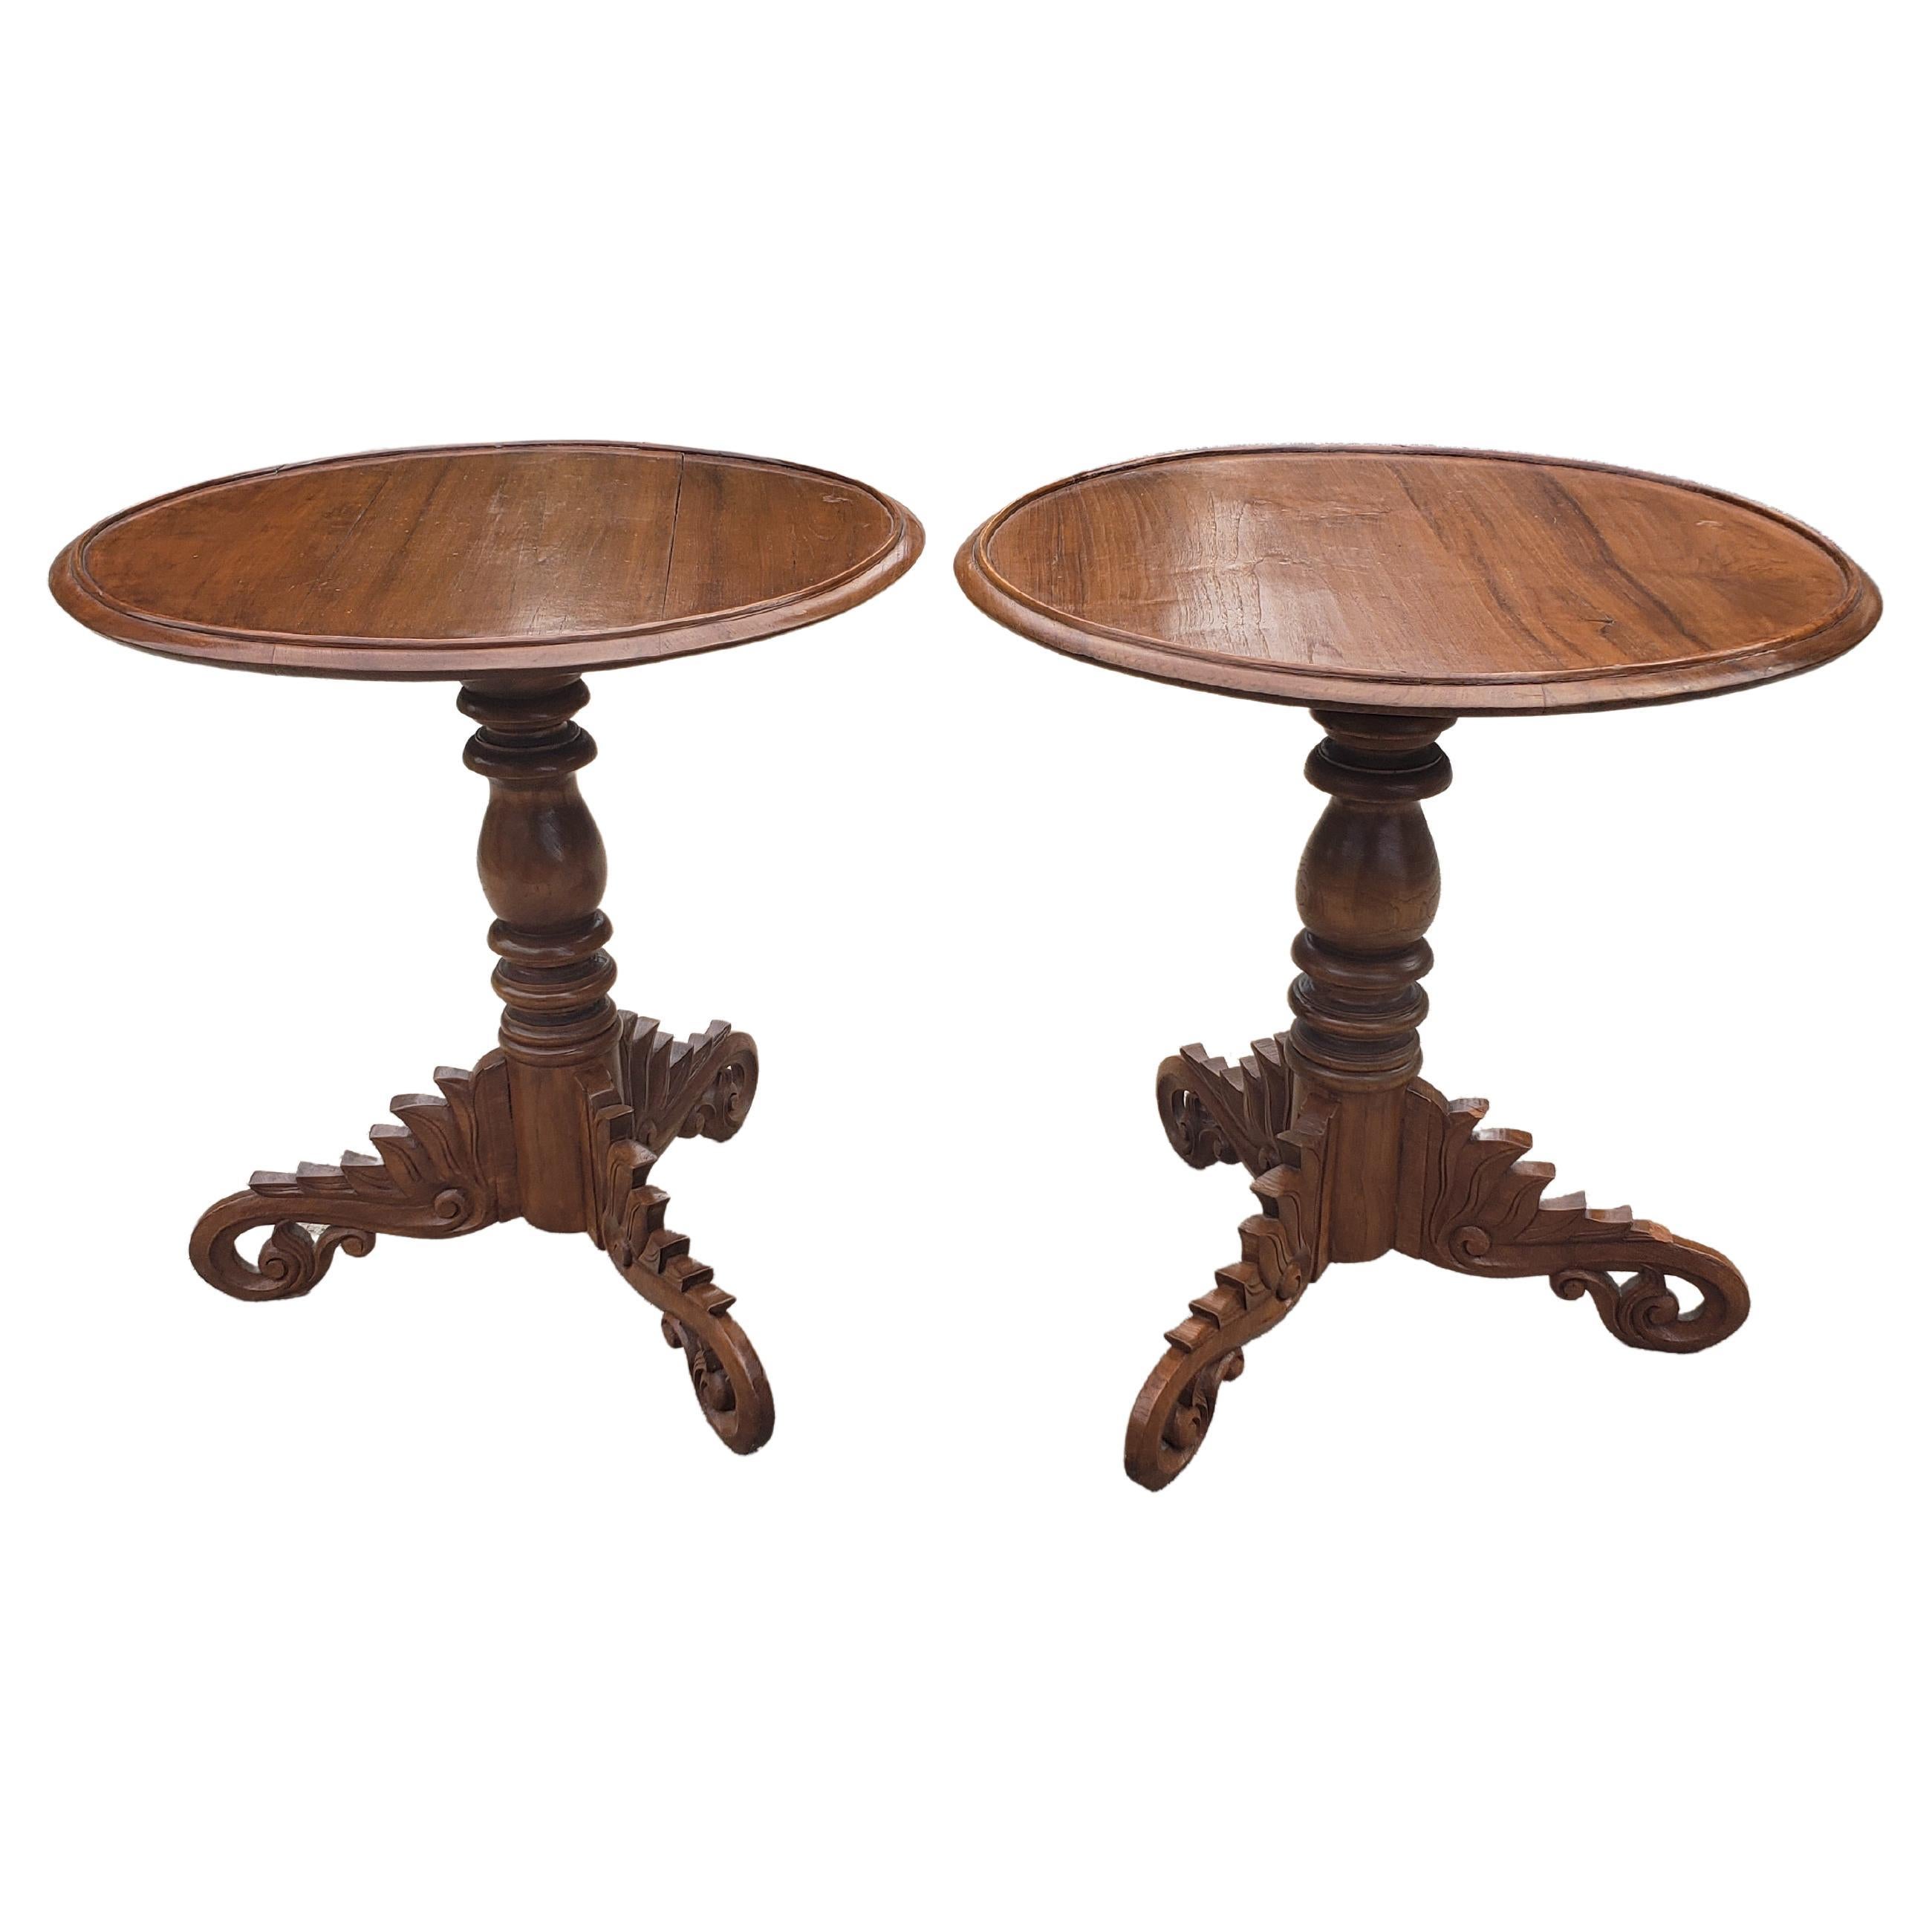 20th Century Vintage Pedestal Mahogany Tripod Gator Tail Feet Side Tables, a Pair For Sale